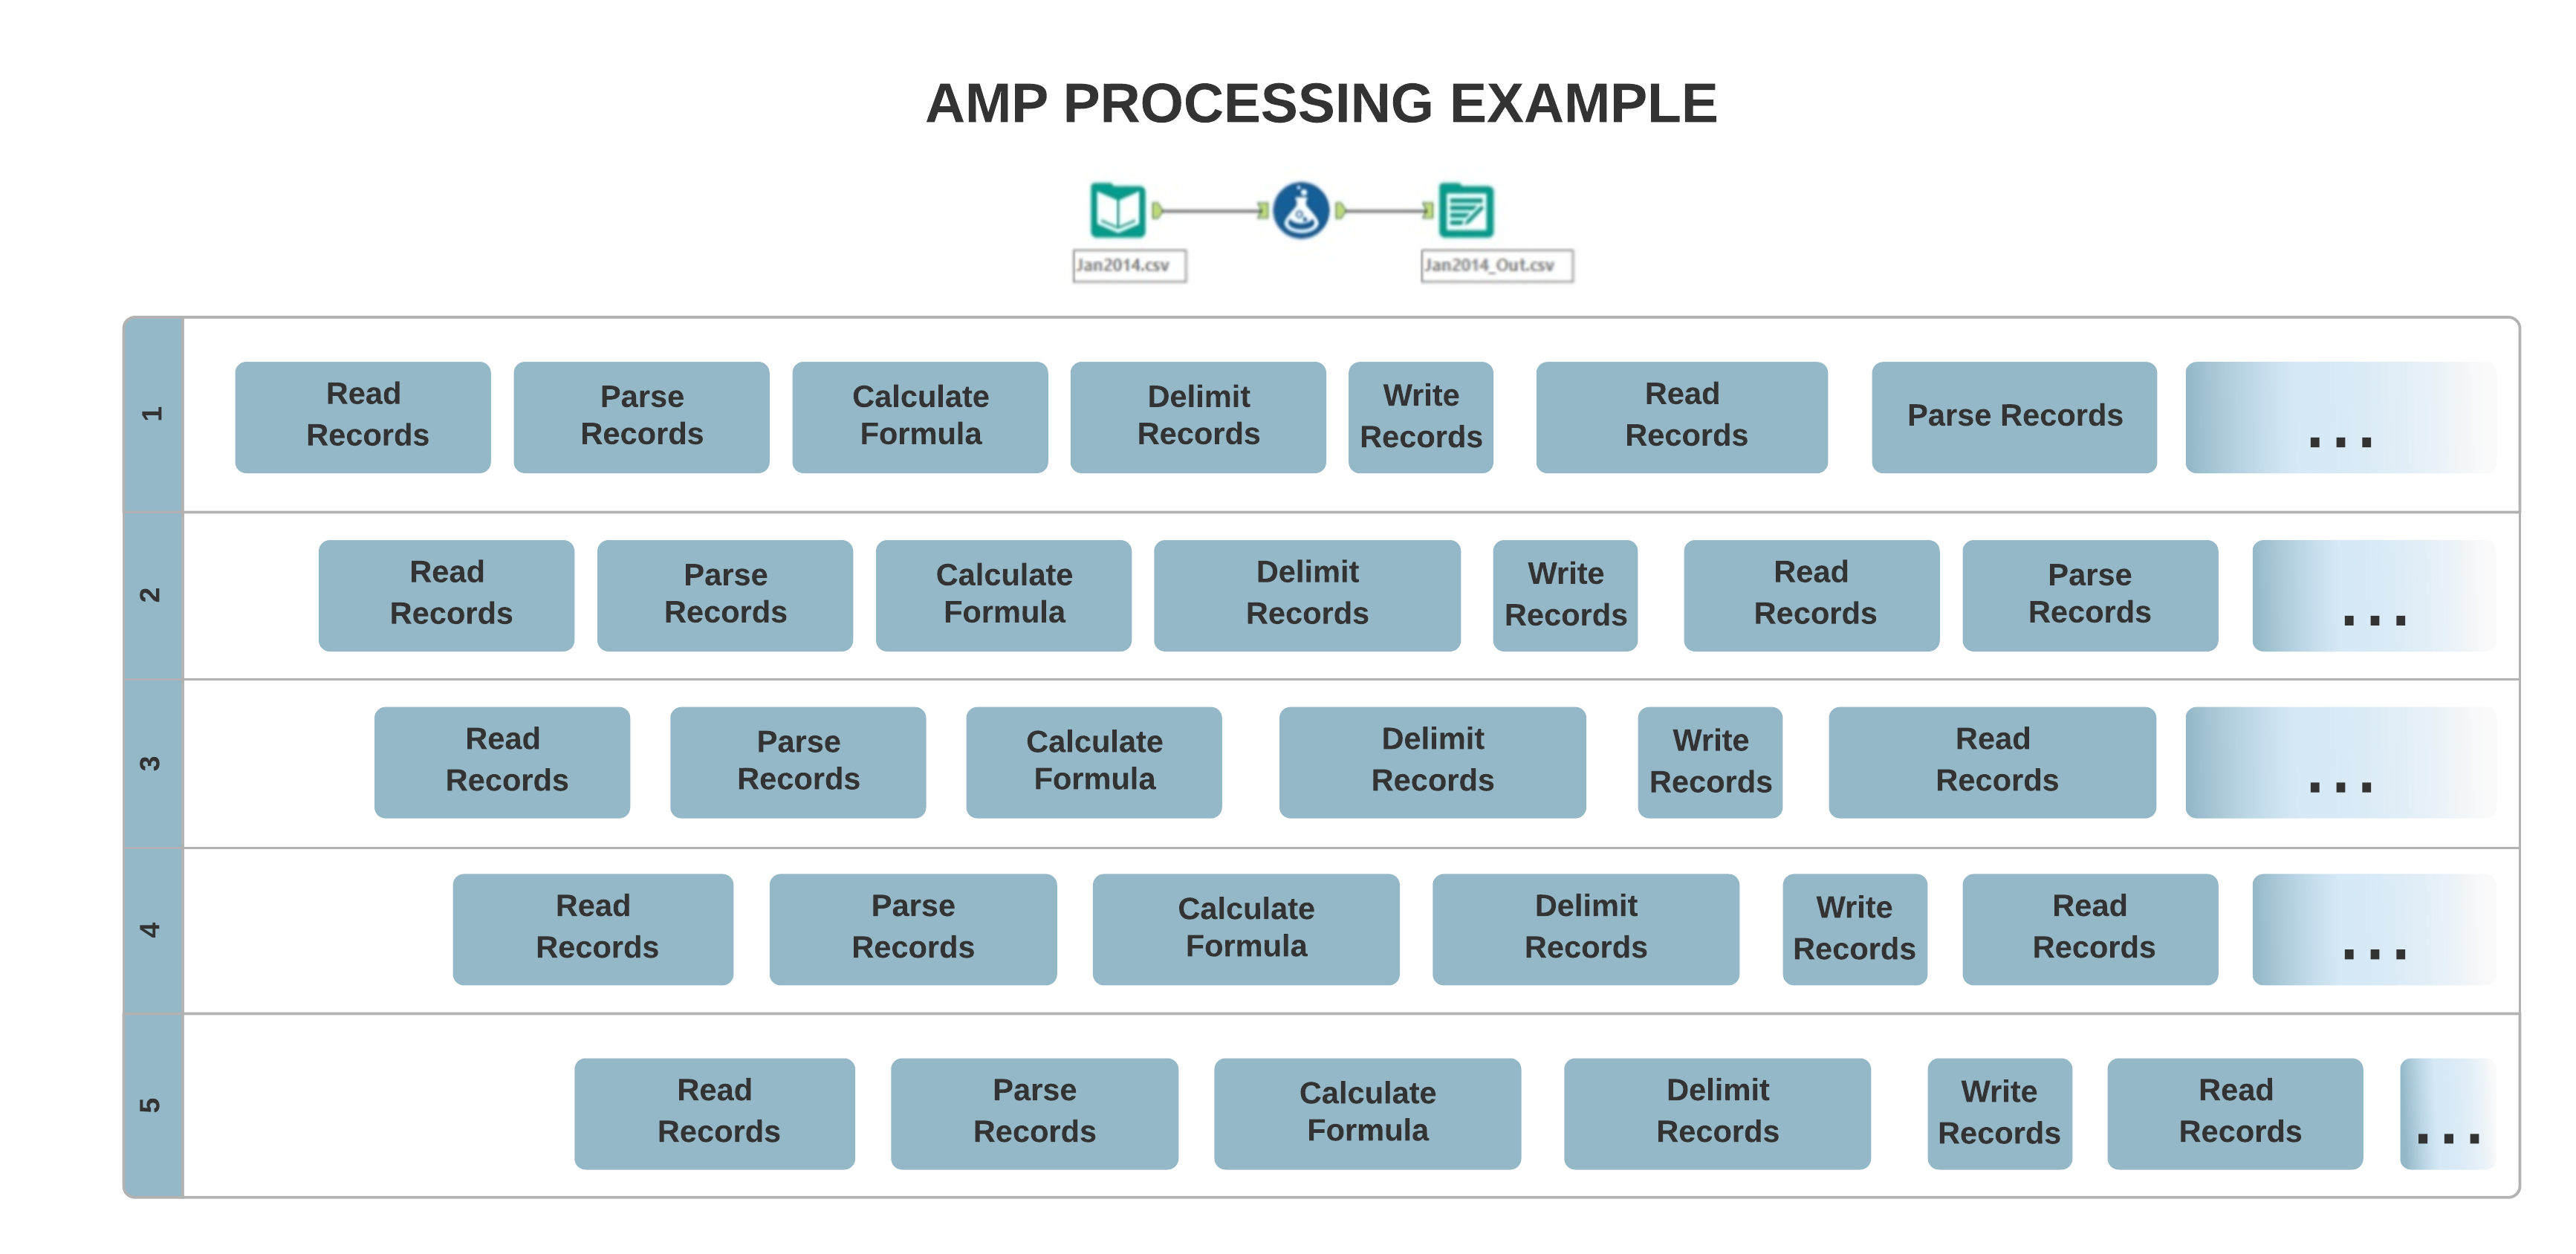 With multiple cores, the AMP architecture allows for multi-threaded processing.